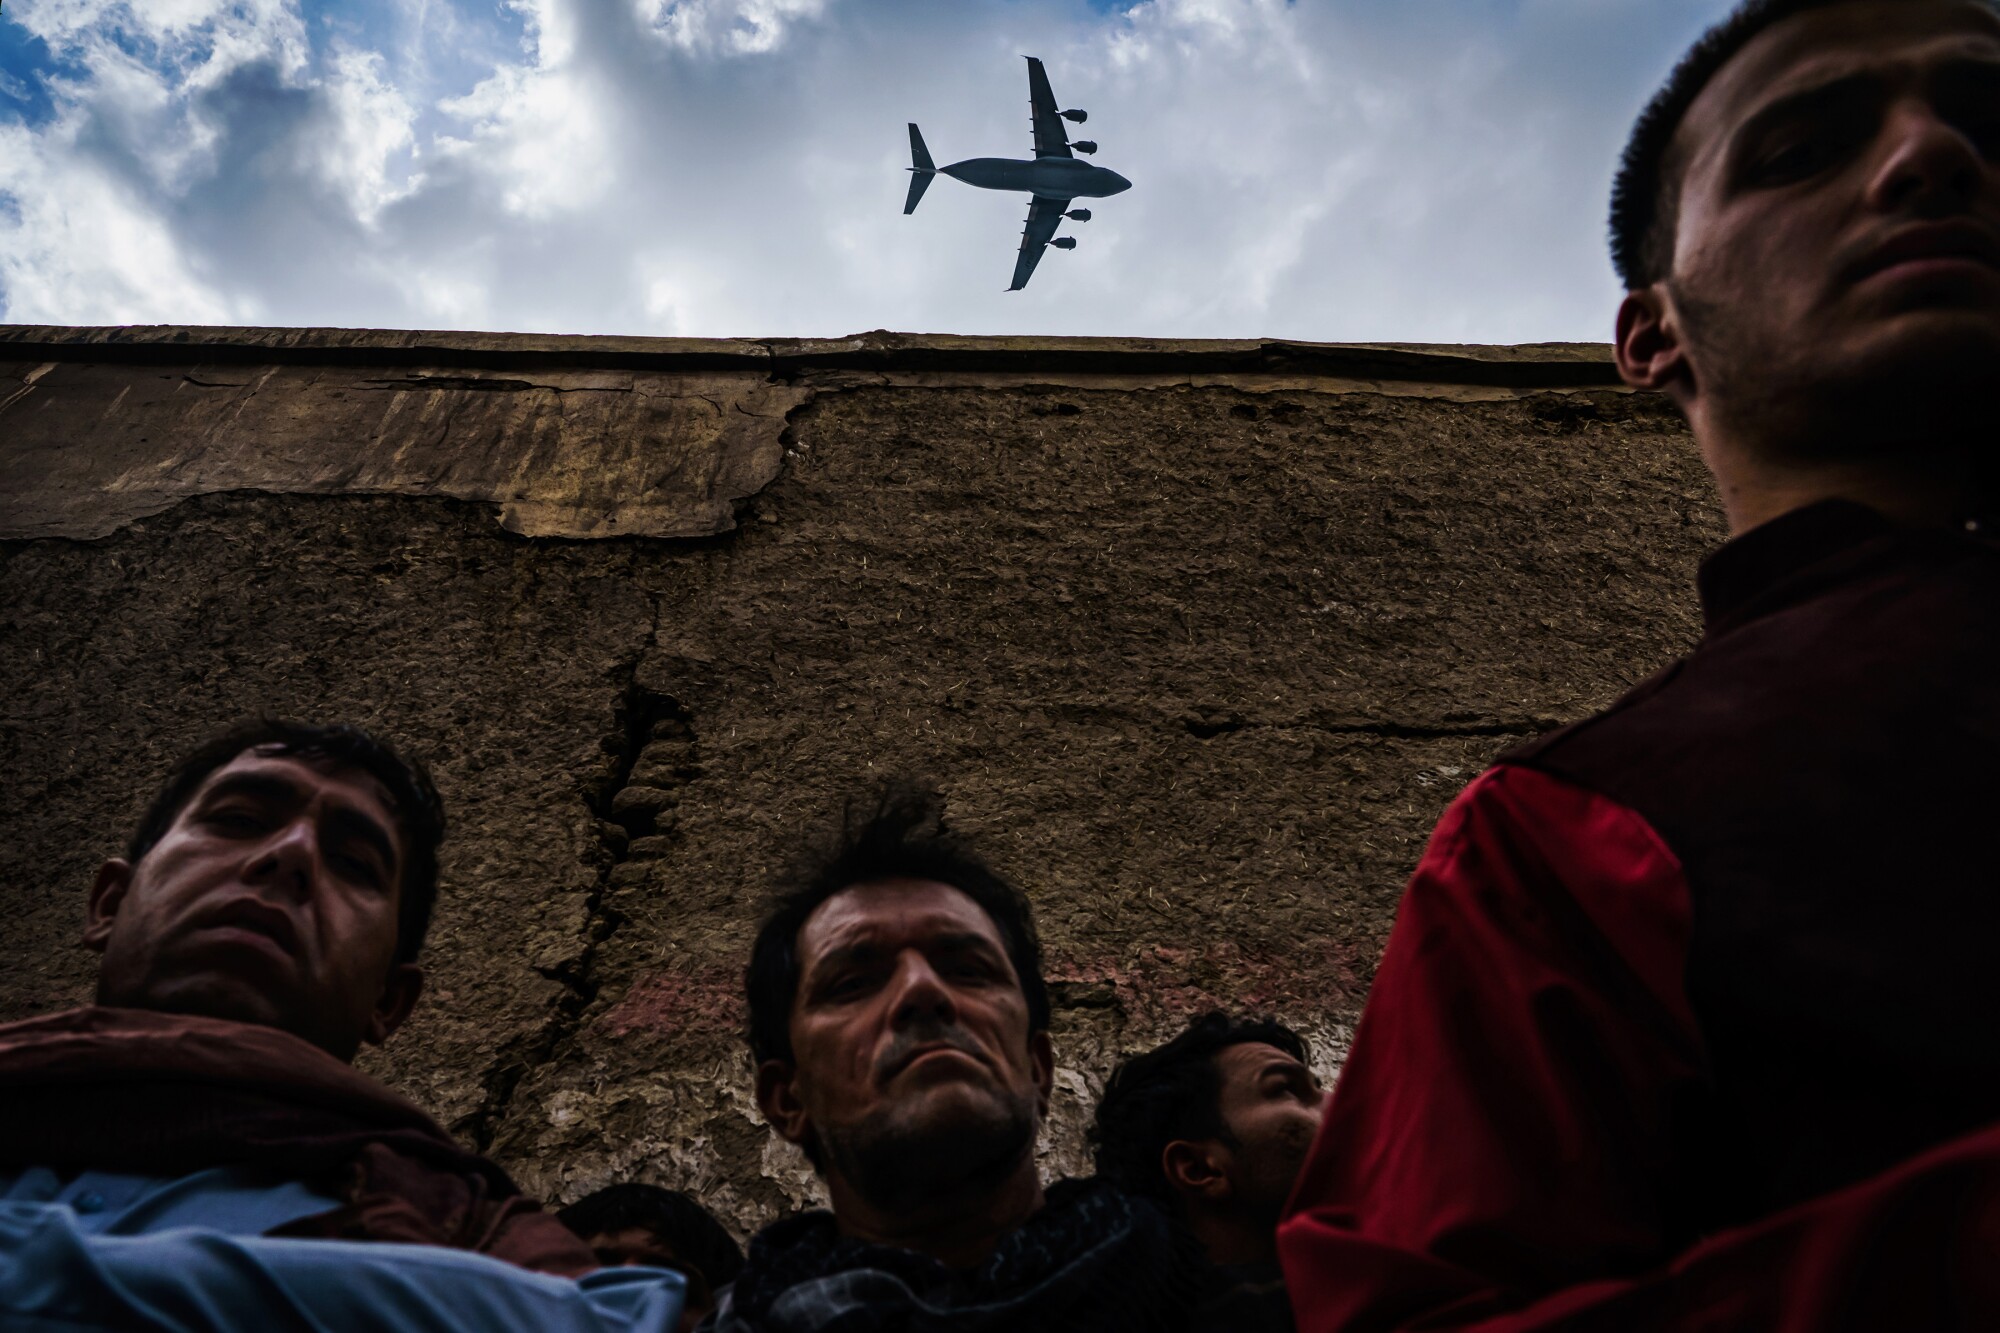 A military transport plane flies over men in the foreground.